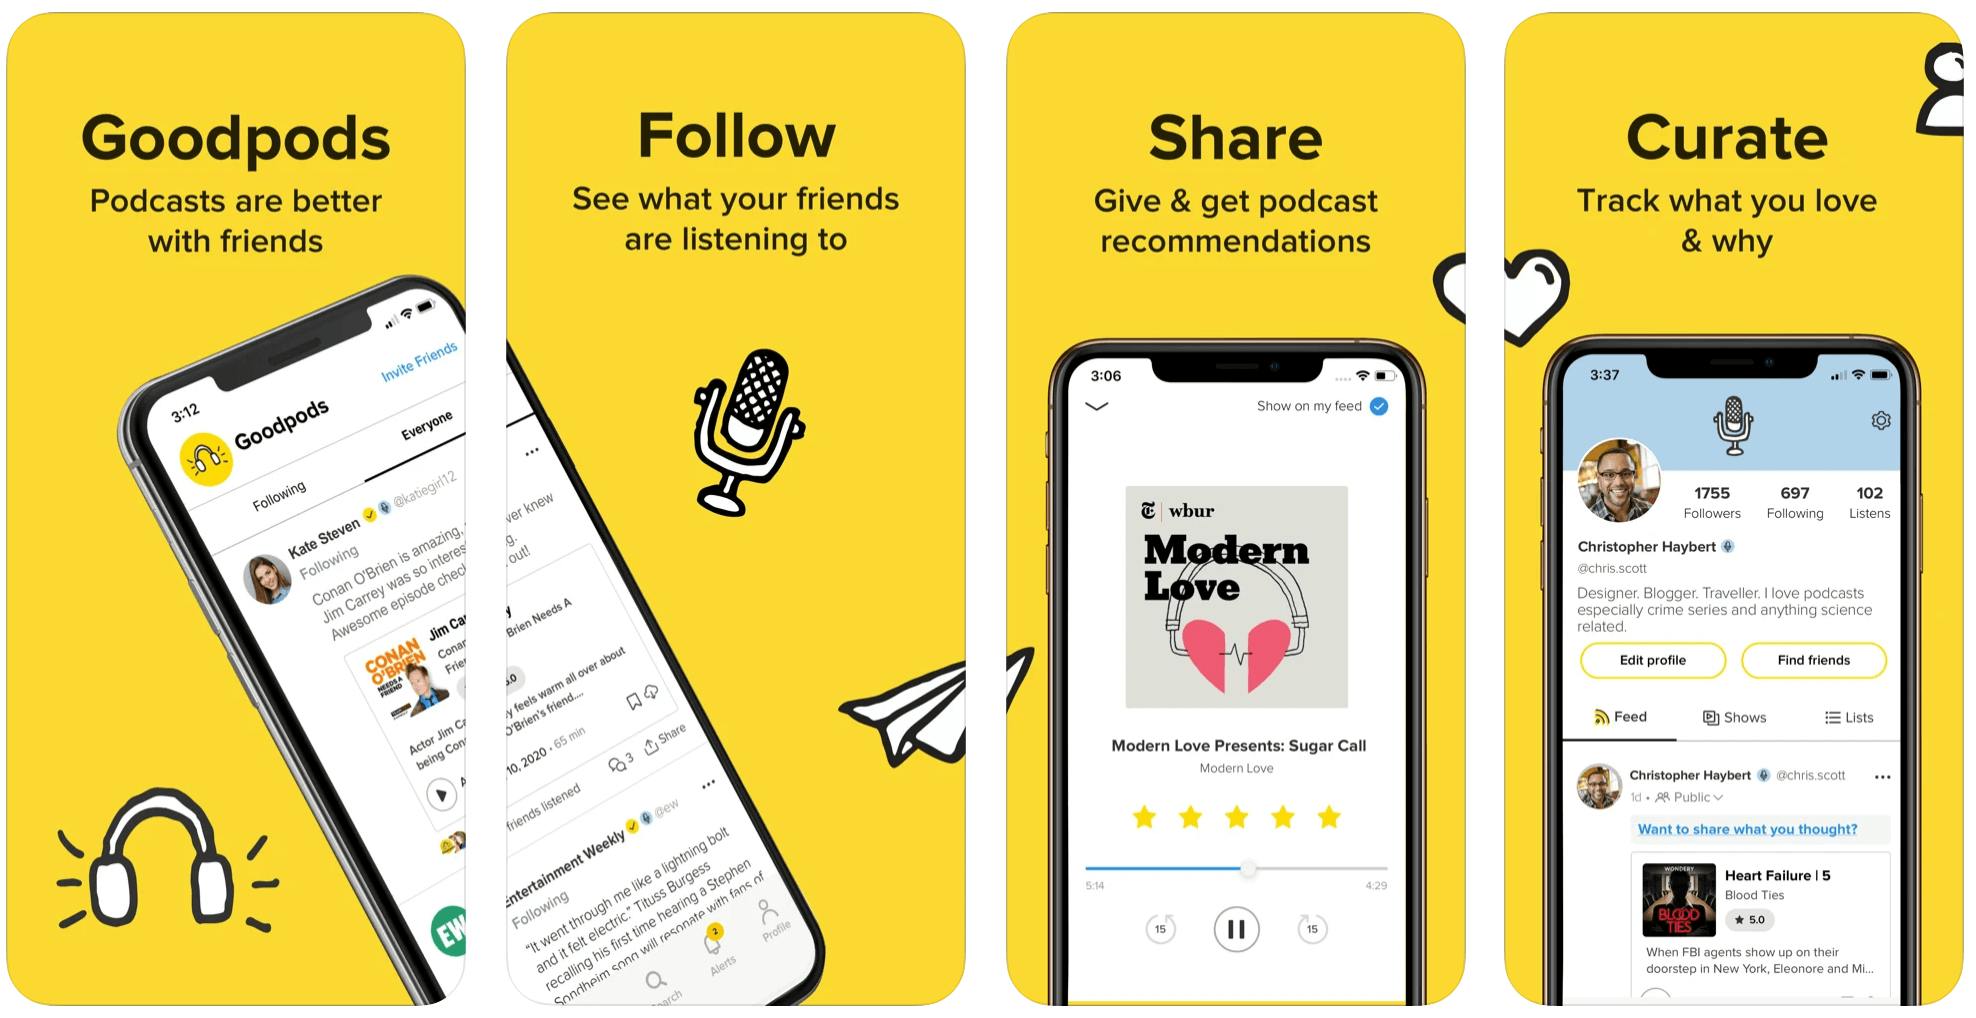 Four back-to-back screenshots of Goodpods app within a smartphone, a yellow background, and black text.